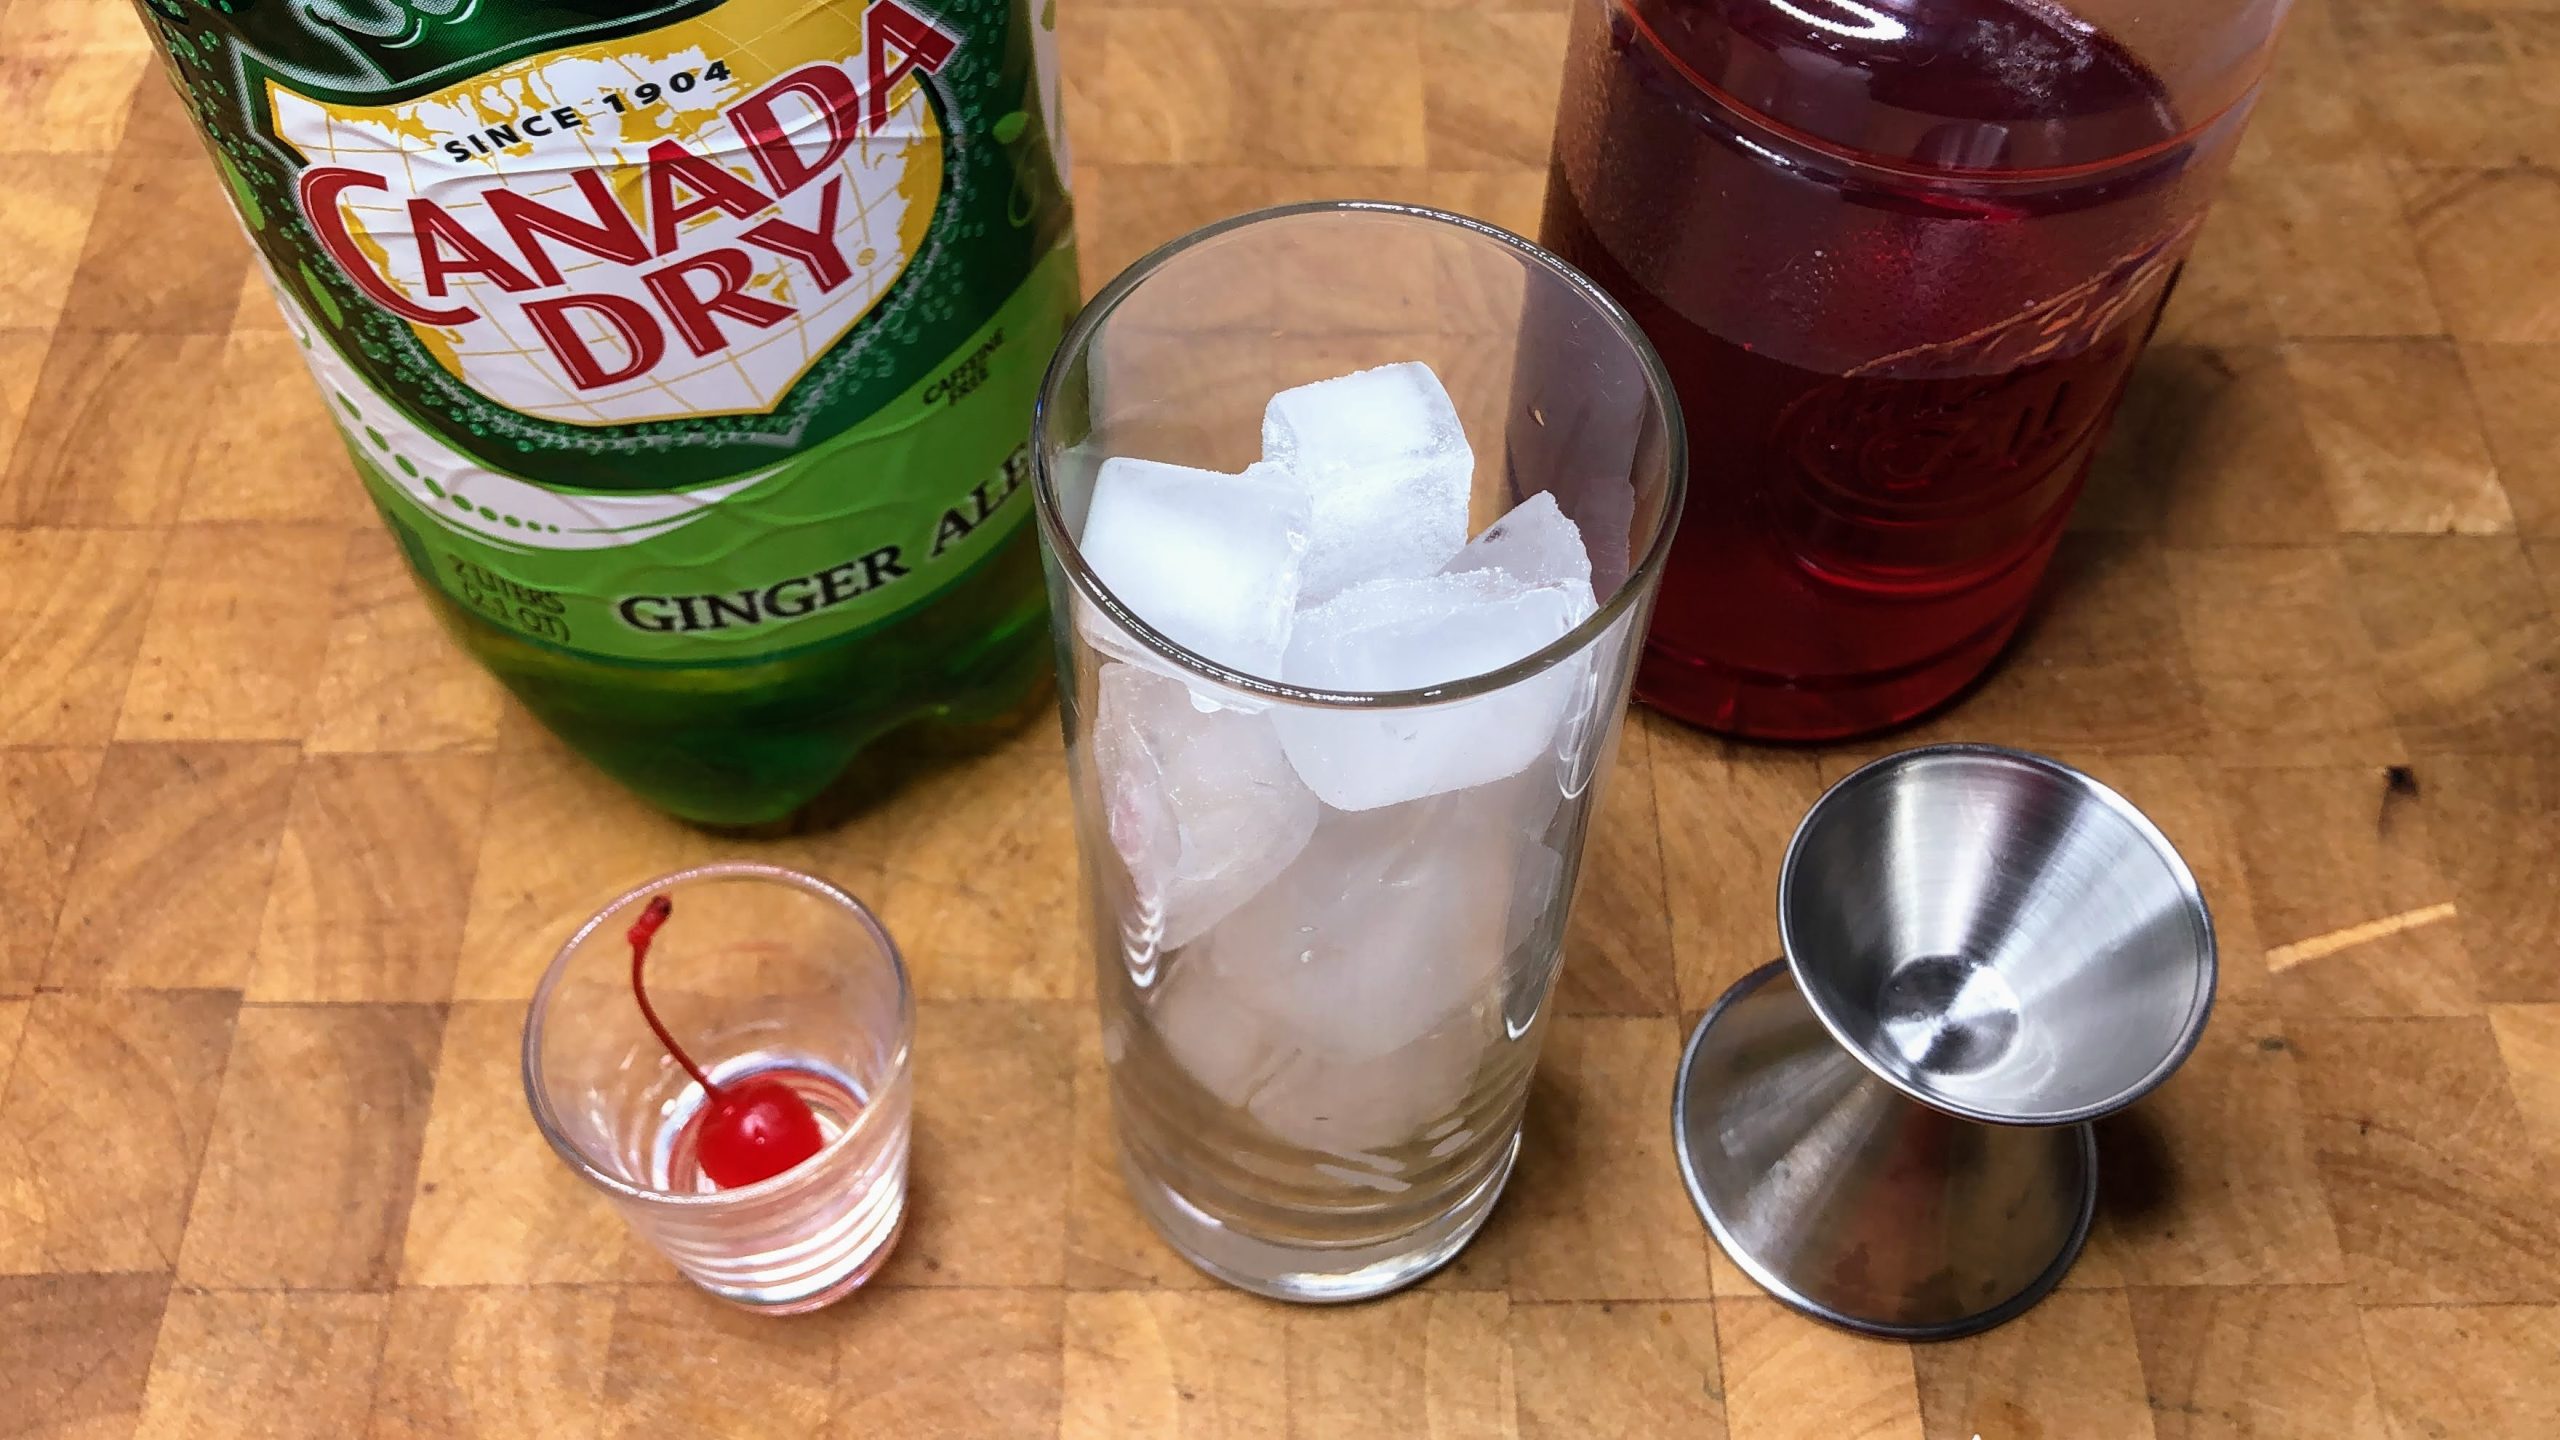 Highball glass filled with ice next to jigger, shot glass with a maraschino cherry and bottles of ginger ale and grenadine.